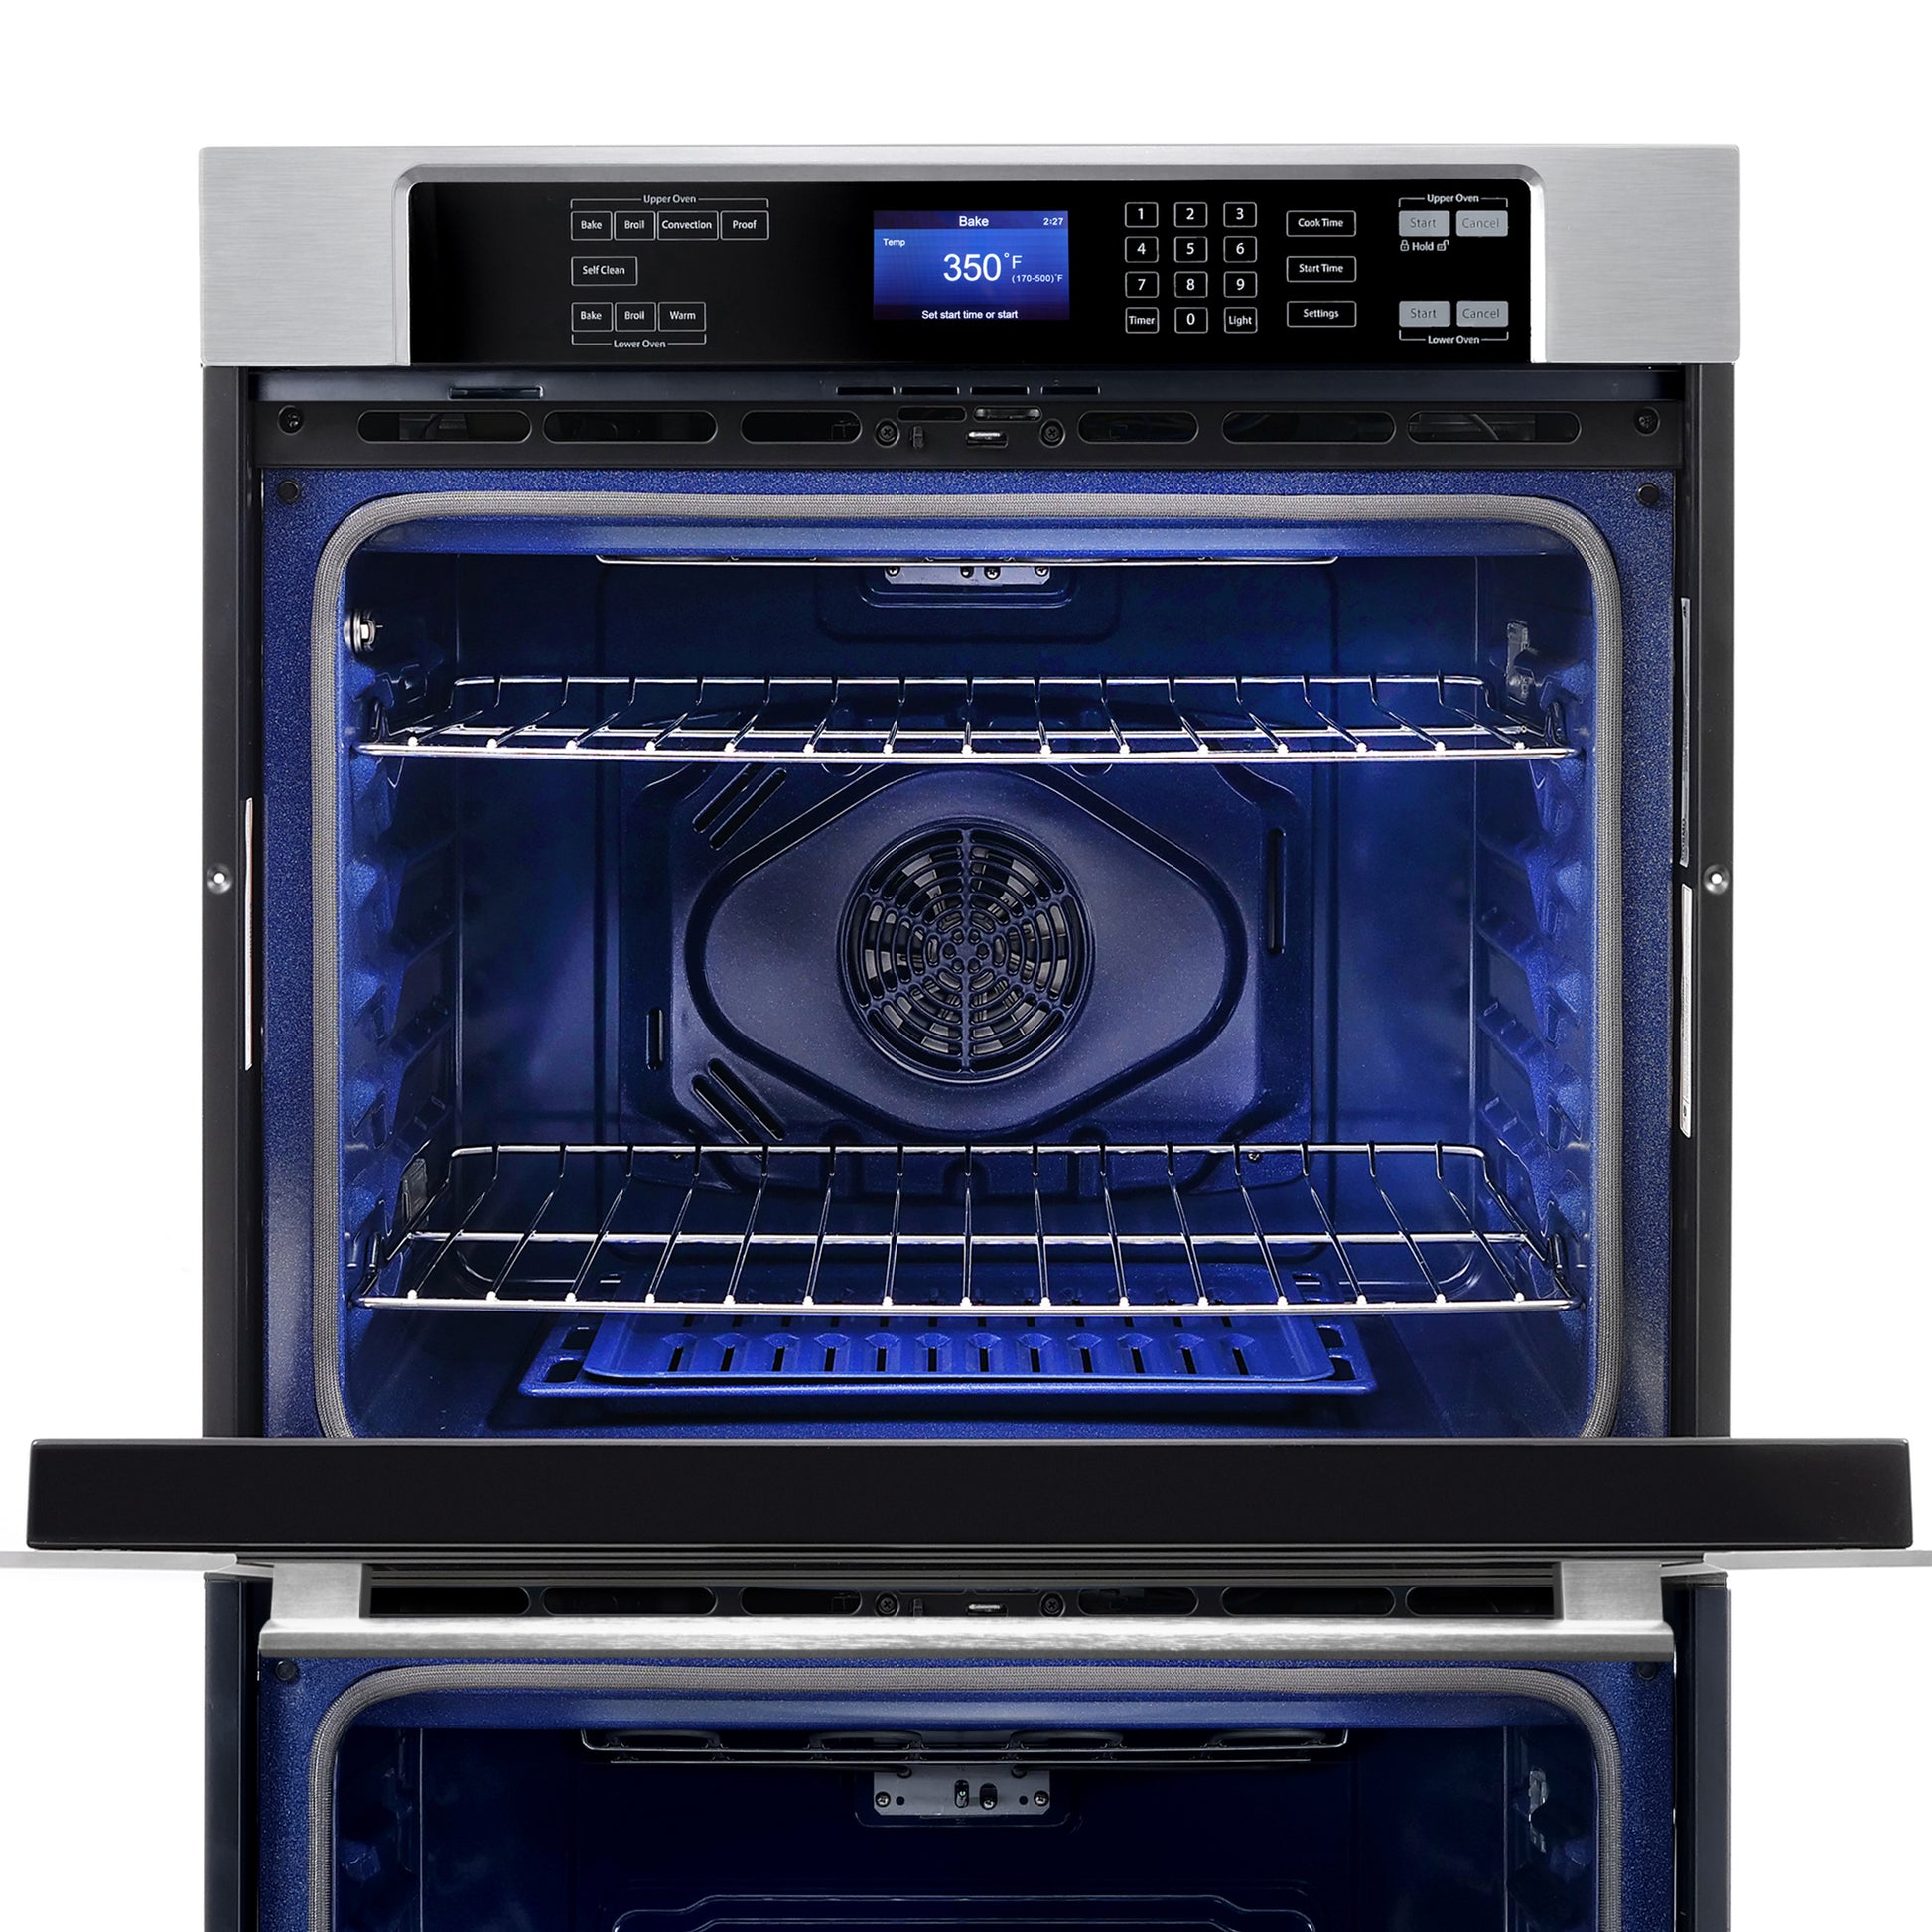 Cosmo Electric 30 in. Double Wall Oven with 5 cu. ft. Capacity, in Stainless Steel